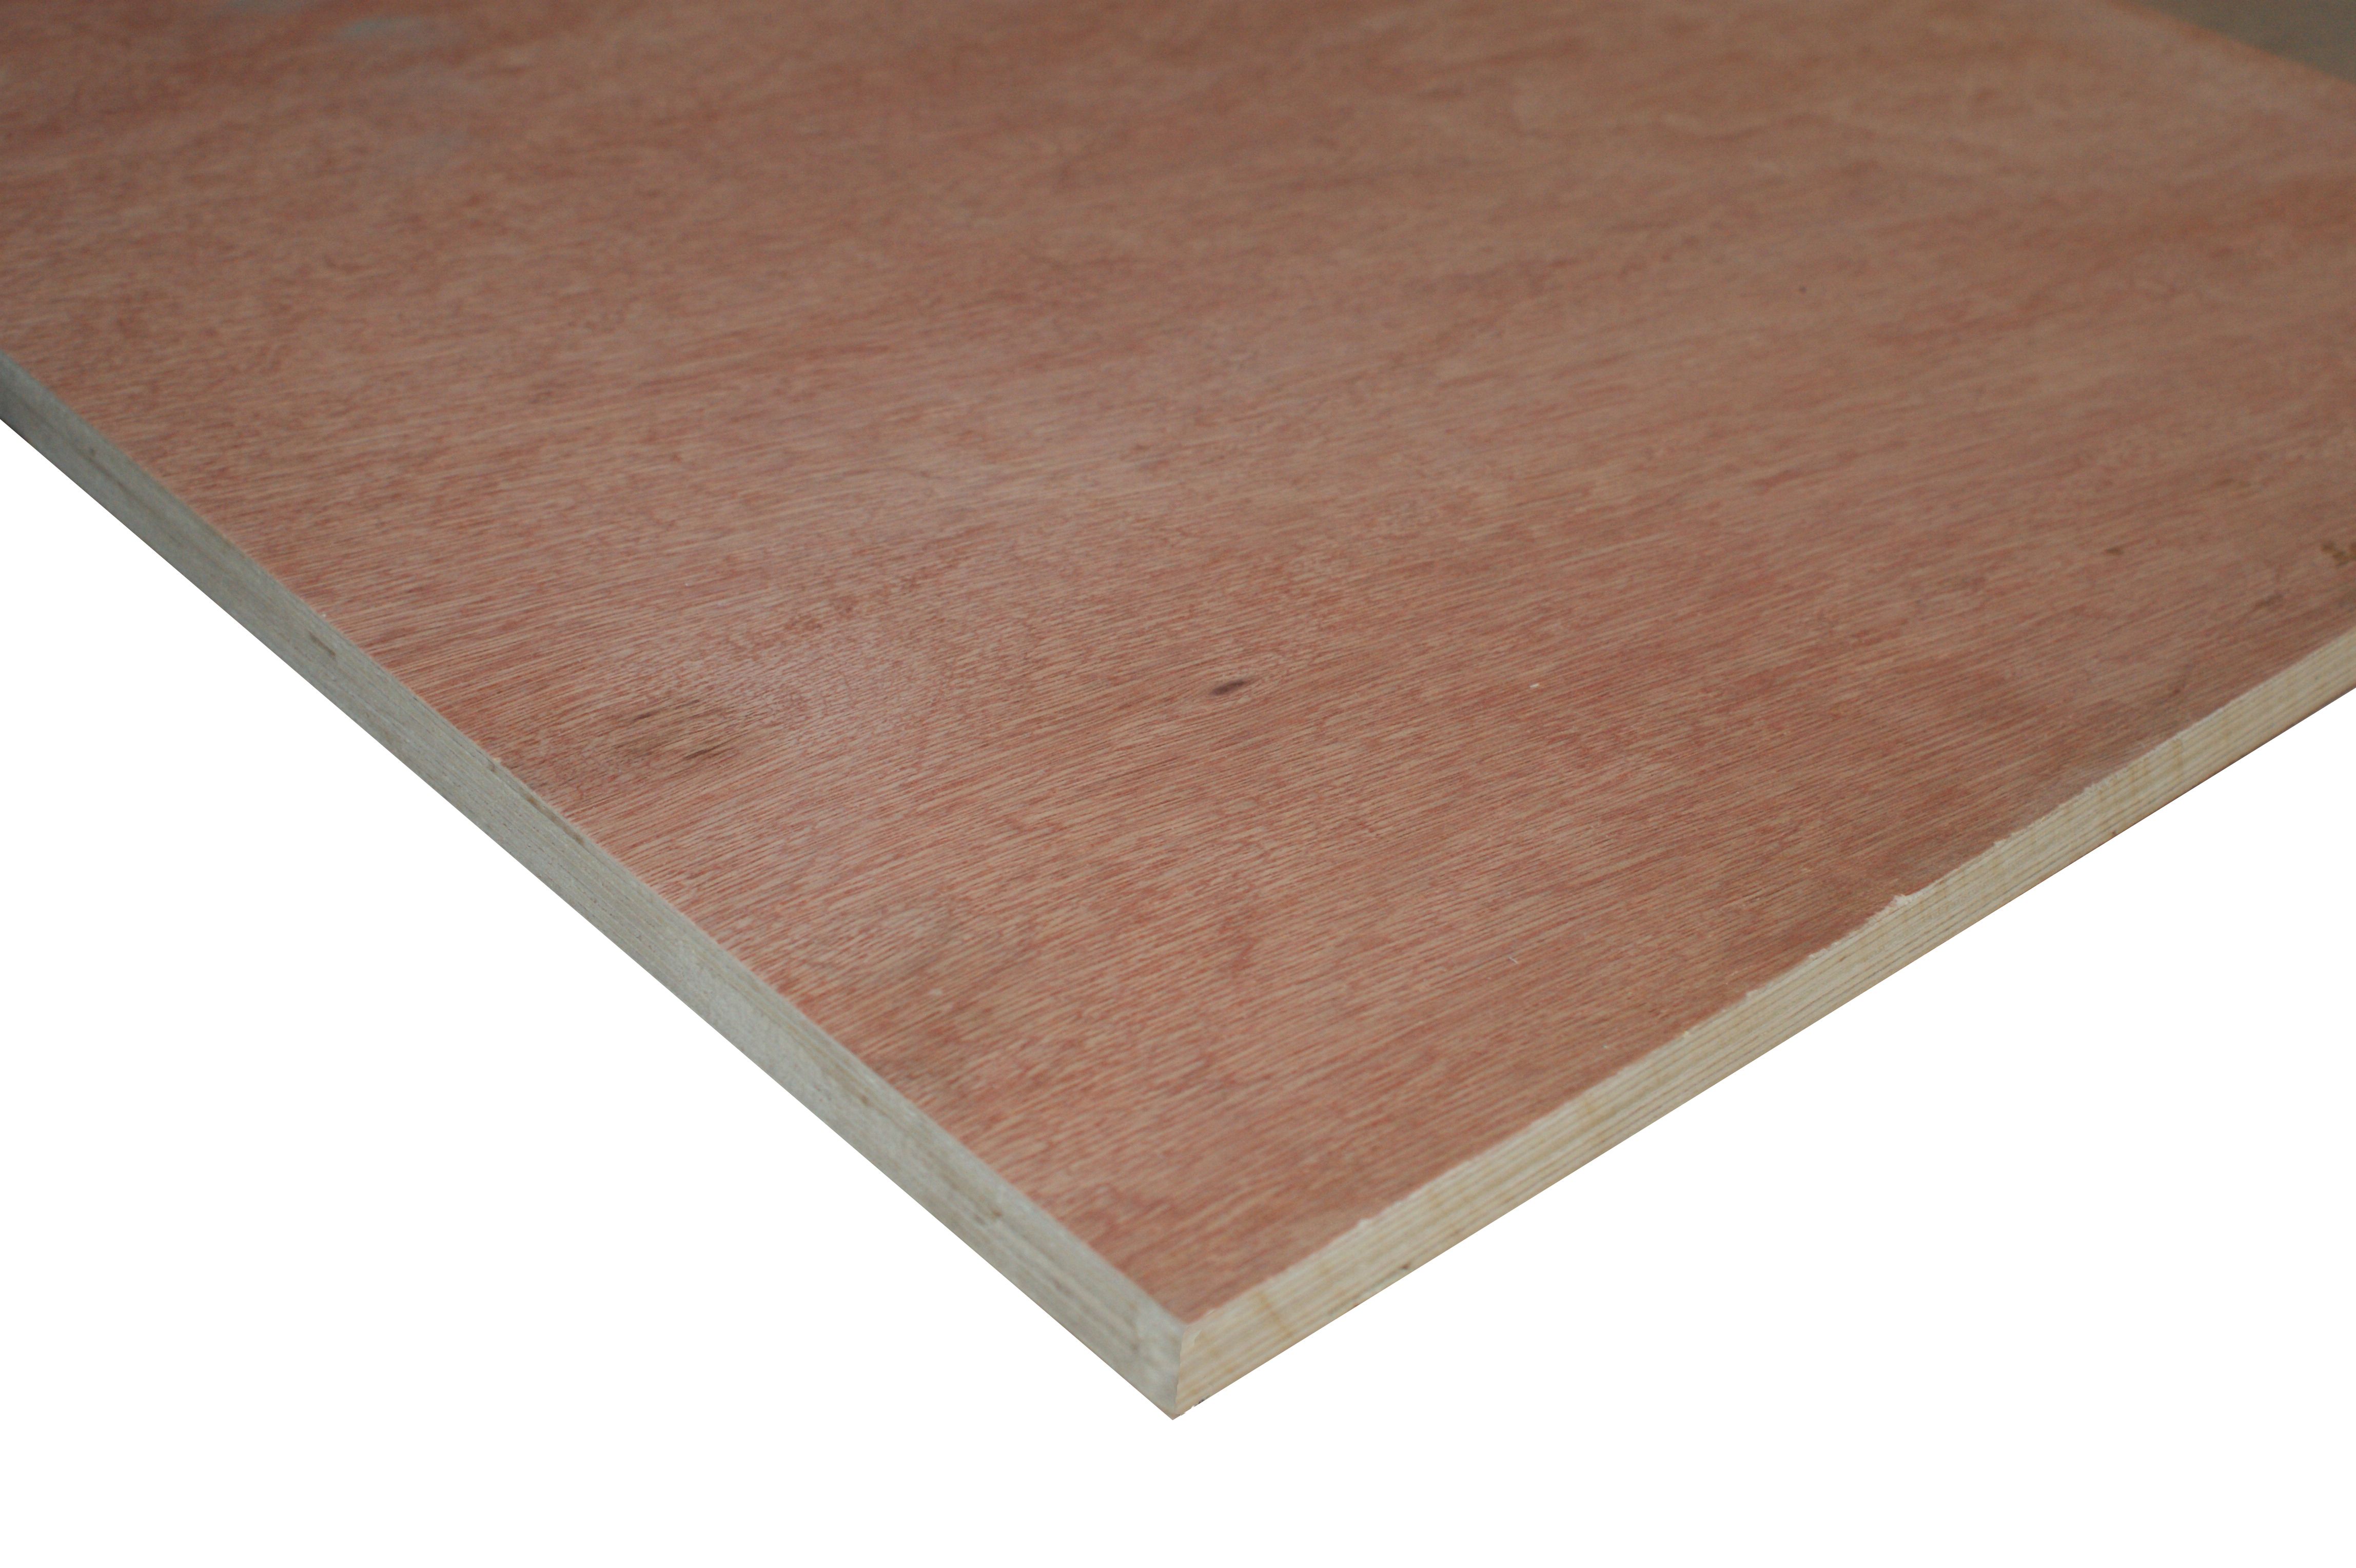 Structural CE2+ Plywood Sheet - 18 x 1220 x 2440mm